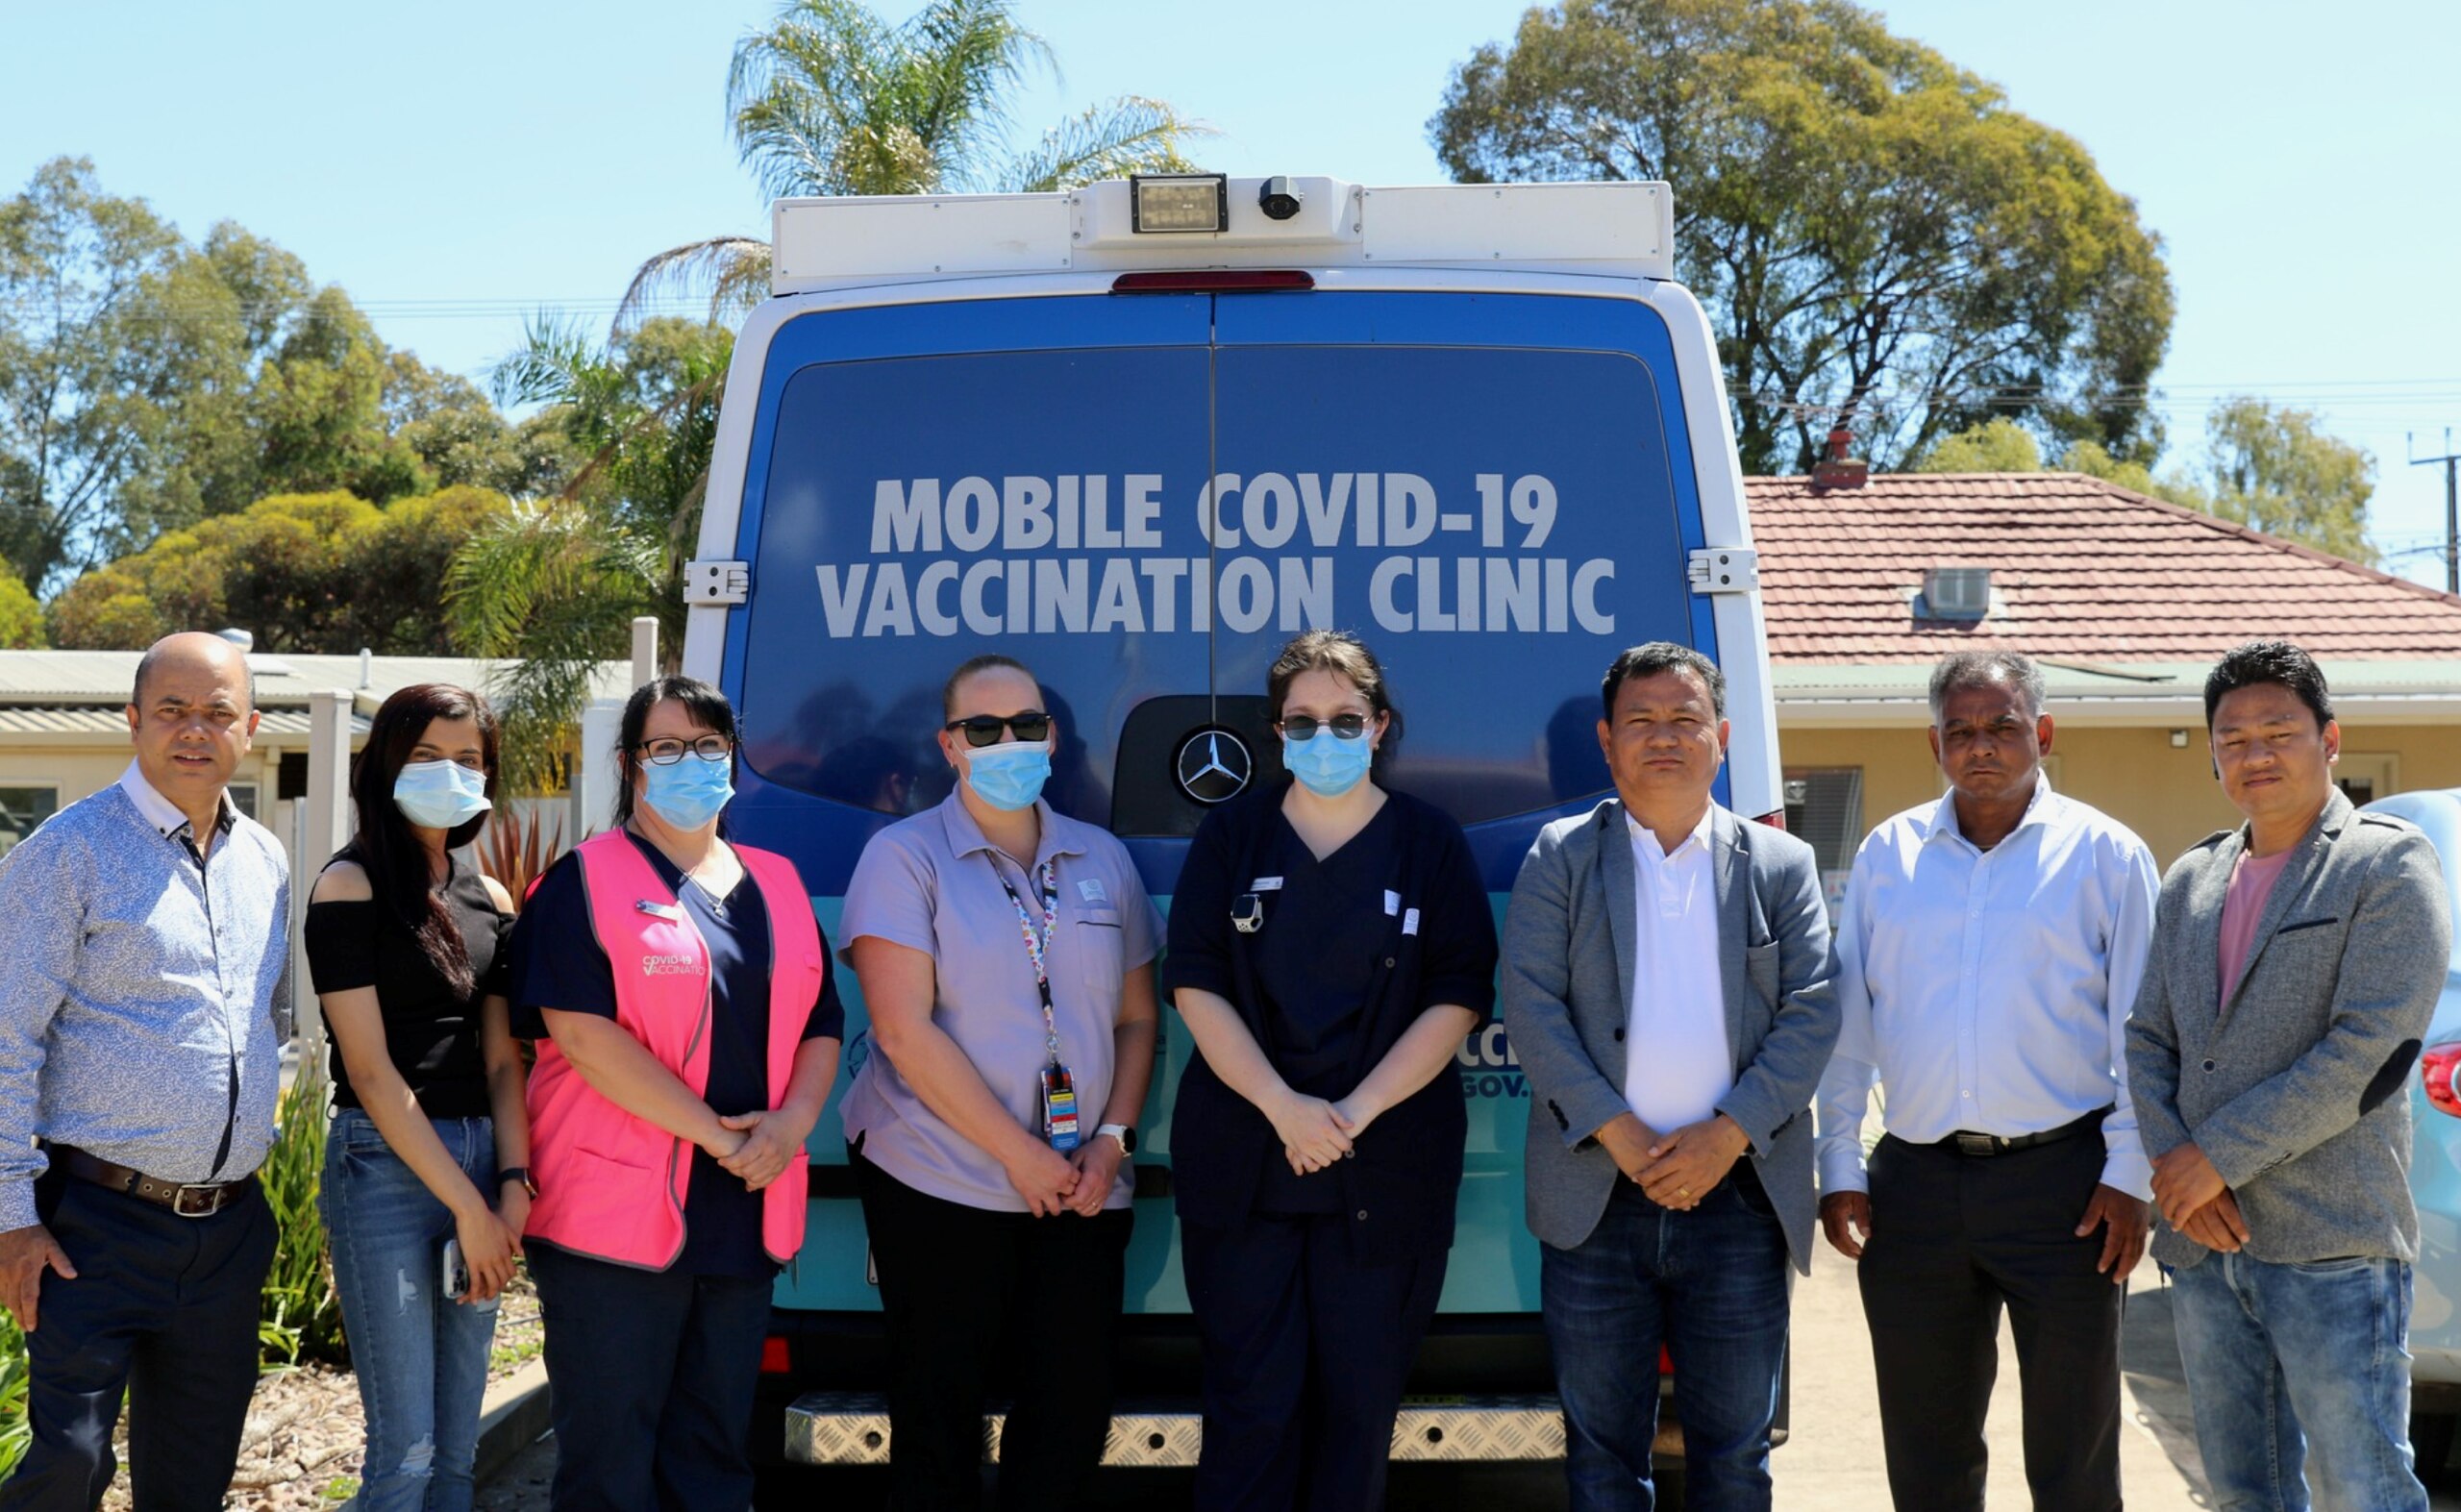 Mobile vaccination clinic in South Australia.